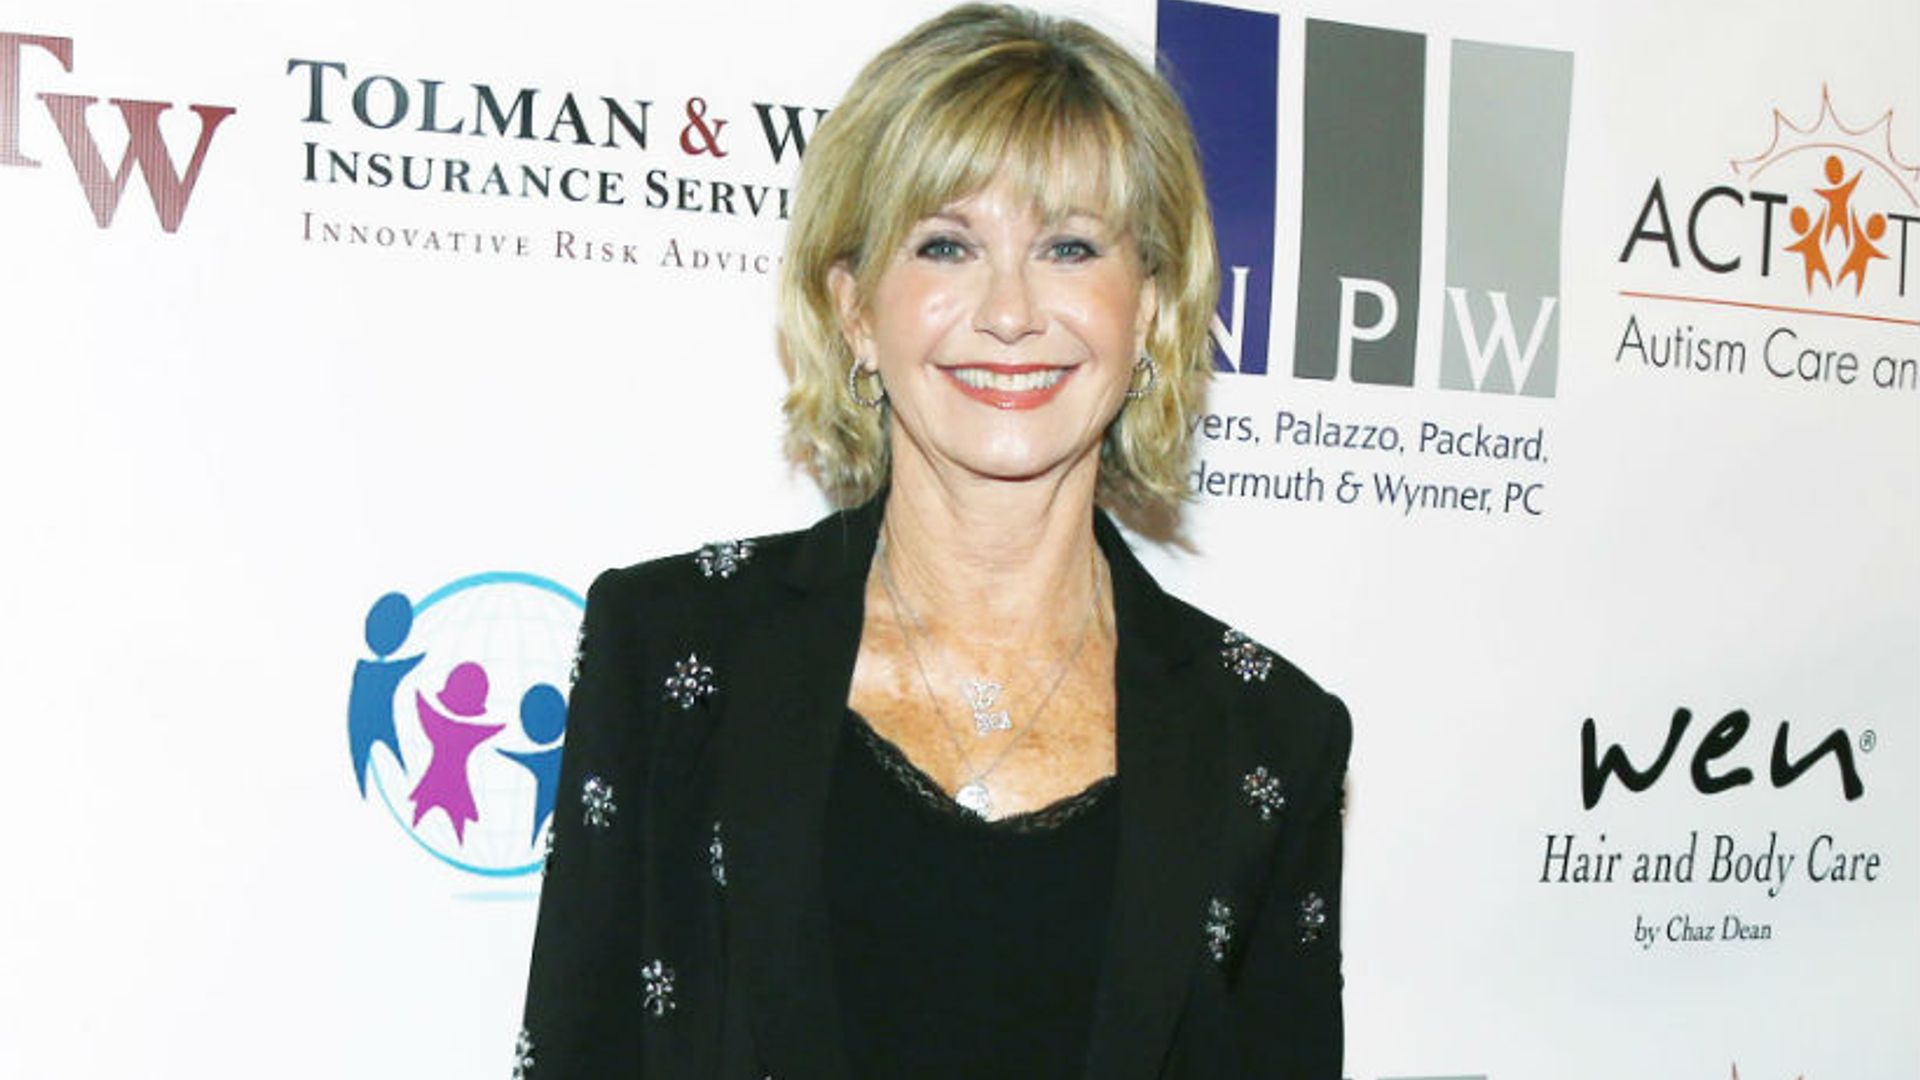 Olivia Newton-John steps out in chic outfit following cancer diagnosis